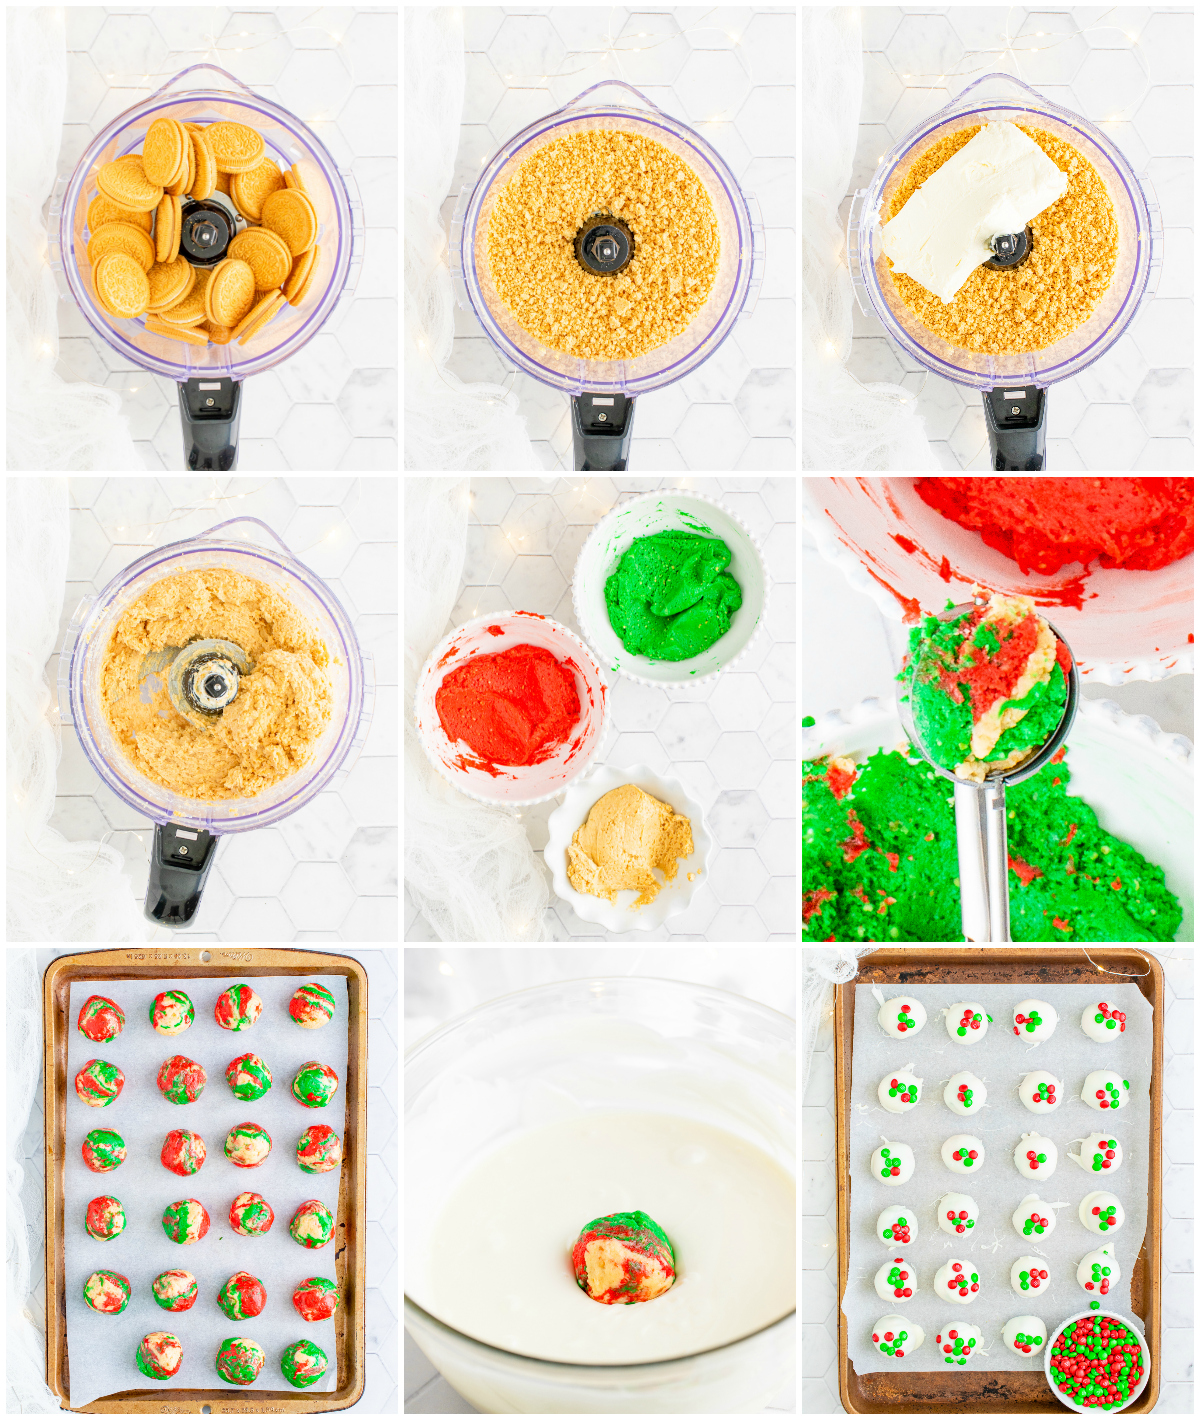 Step by step photos on how to make Oreo Truffles